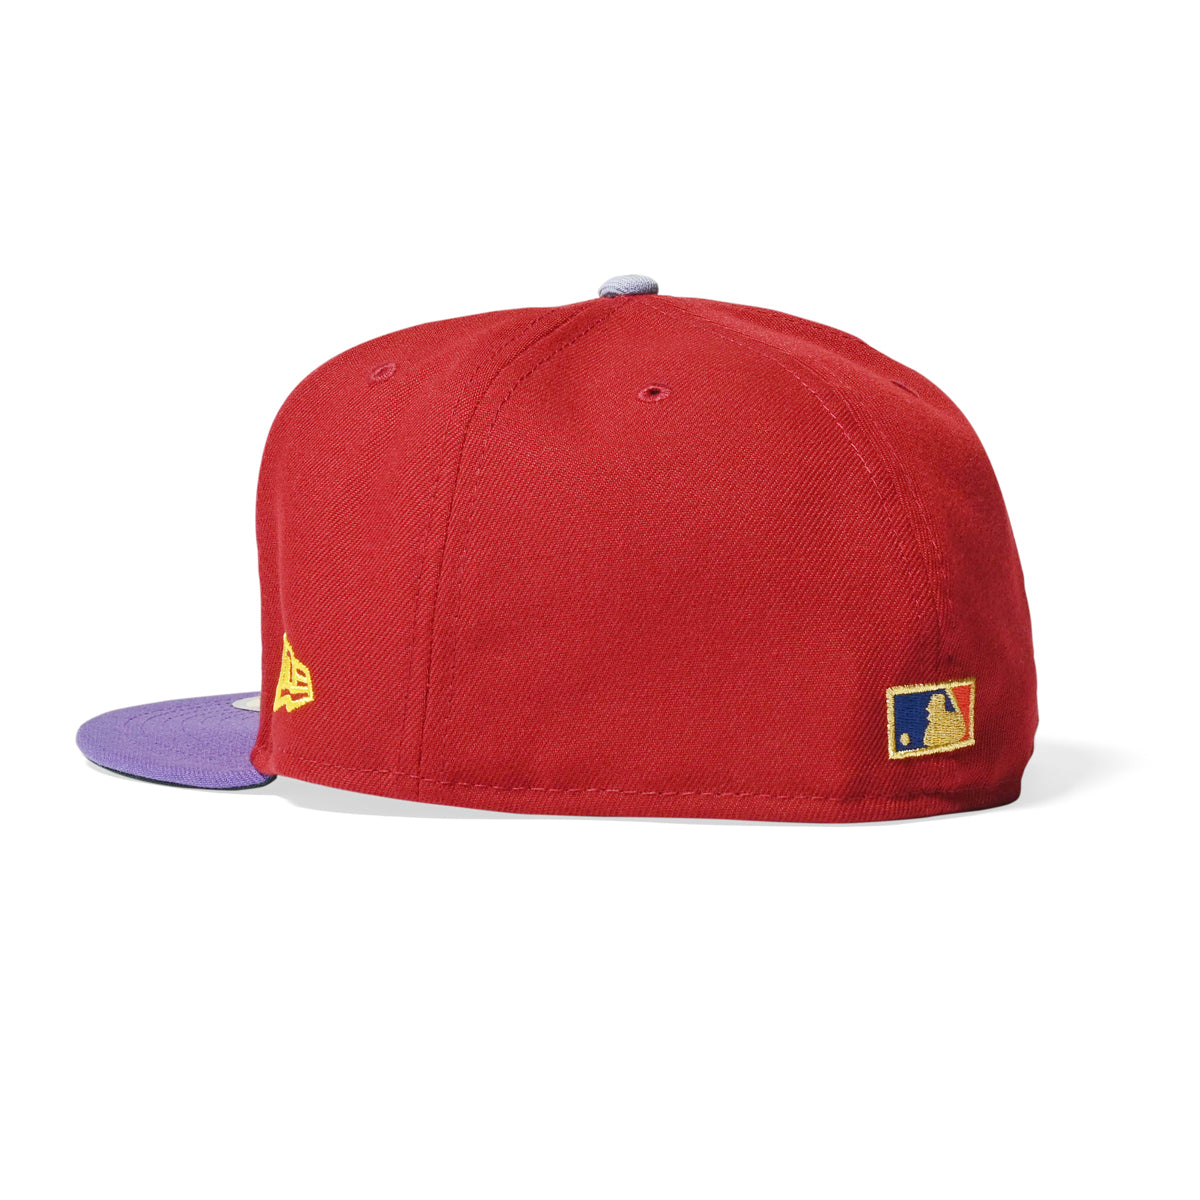 NEW ERA Chicago Cubs - 59FIFTY ALL STAR GAME 1990 MAROON/PURPLE [NE055]